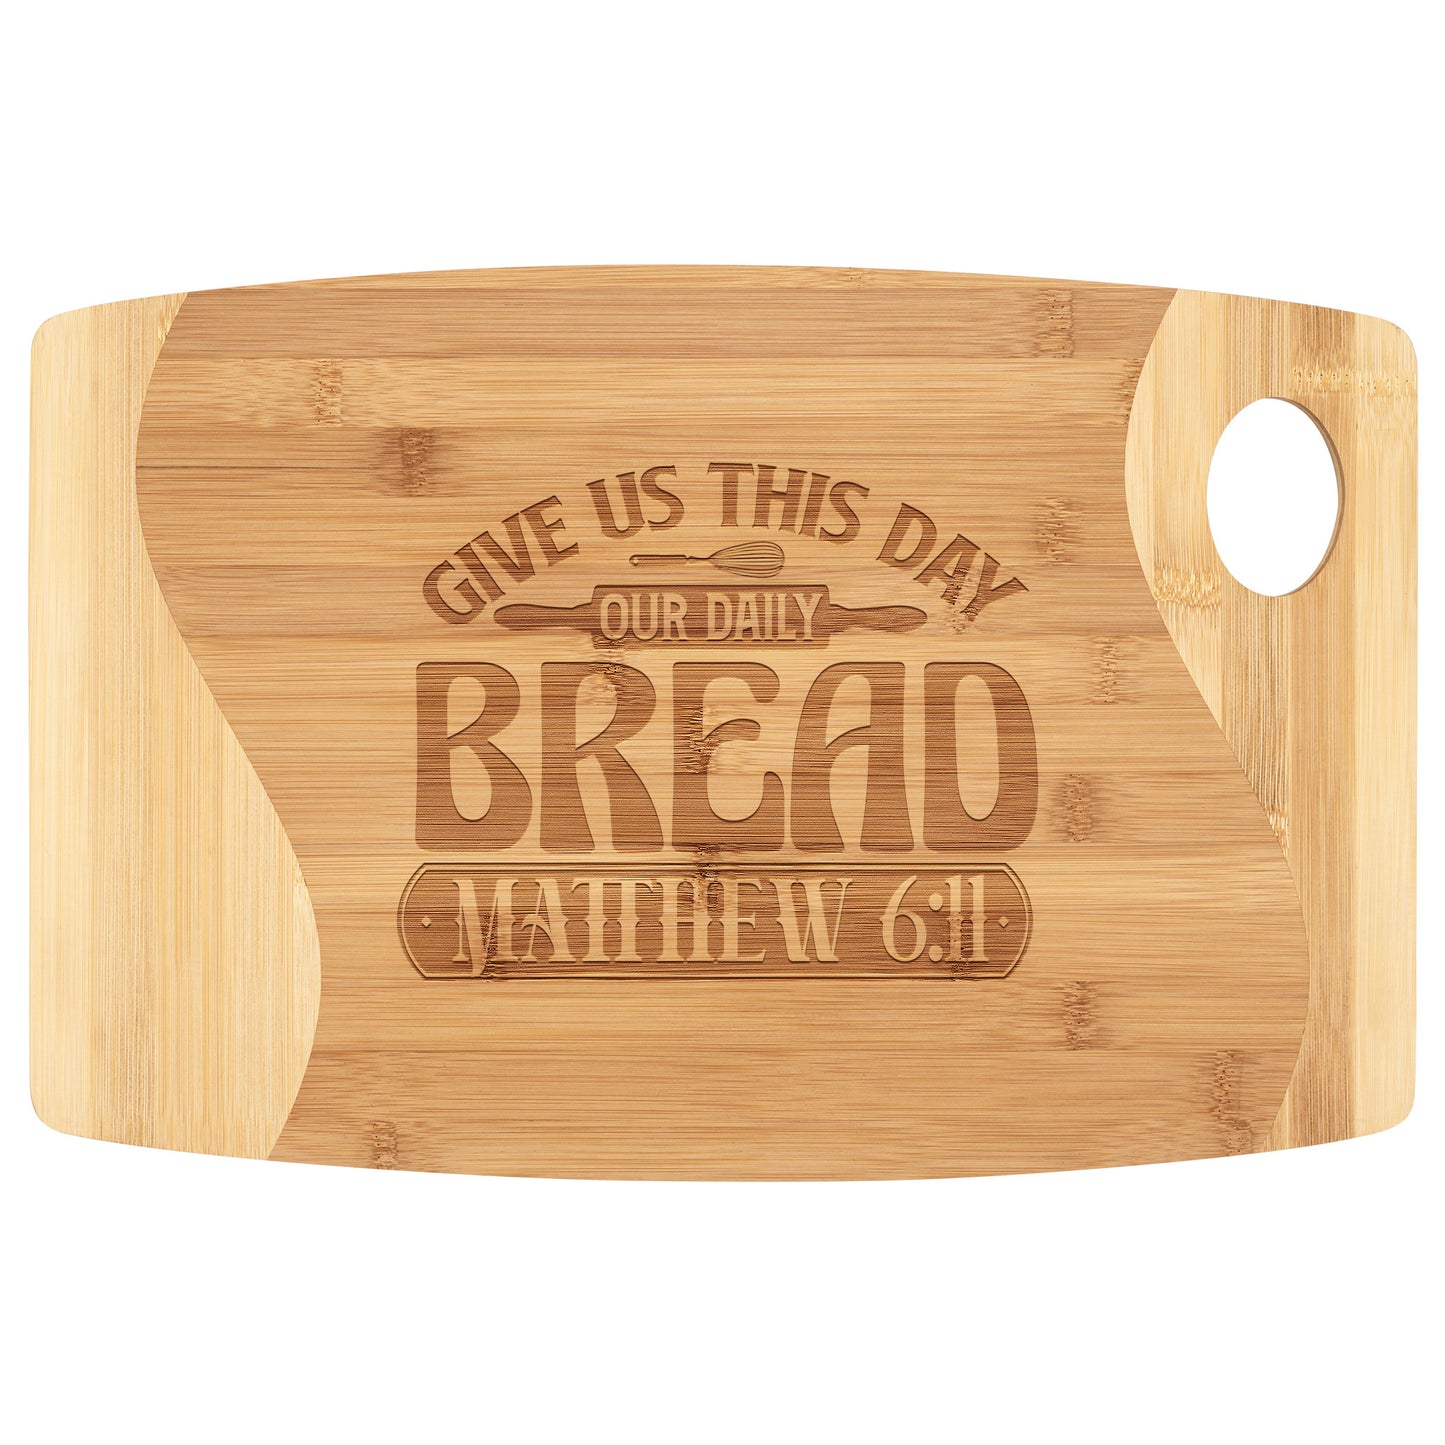 "Our Daily Bread" Bamboo Cutting Board